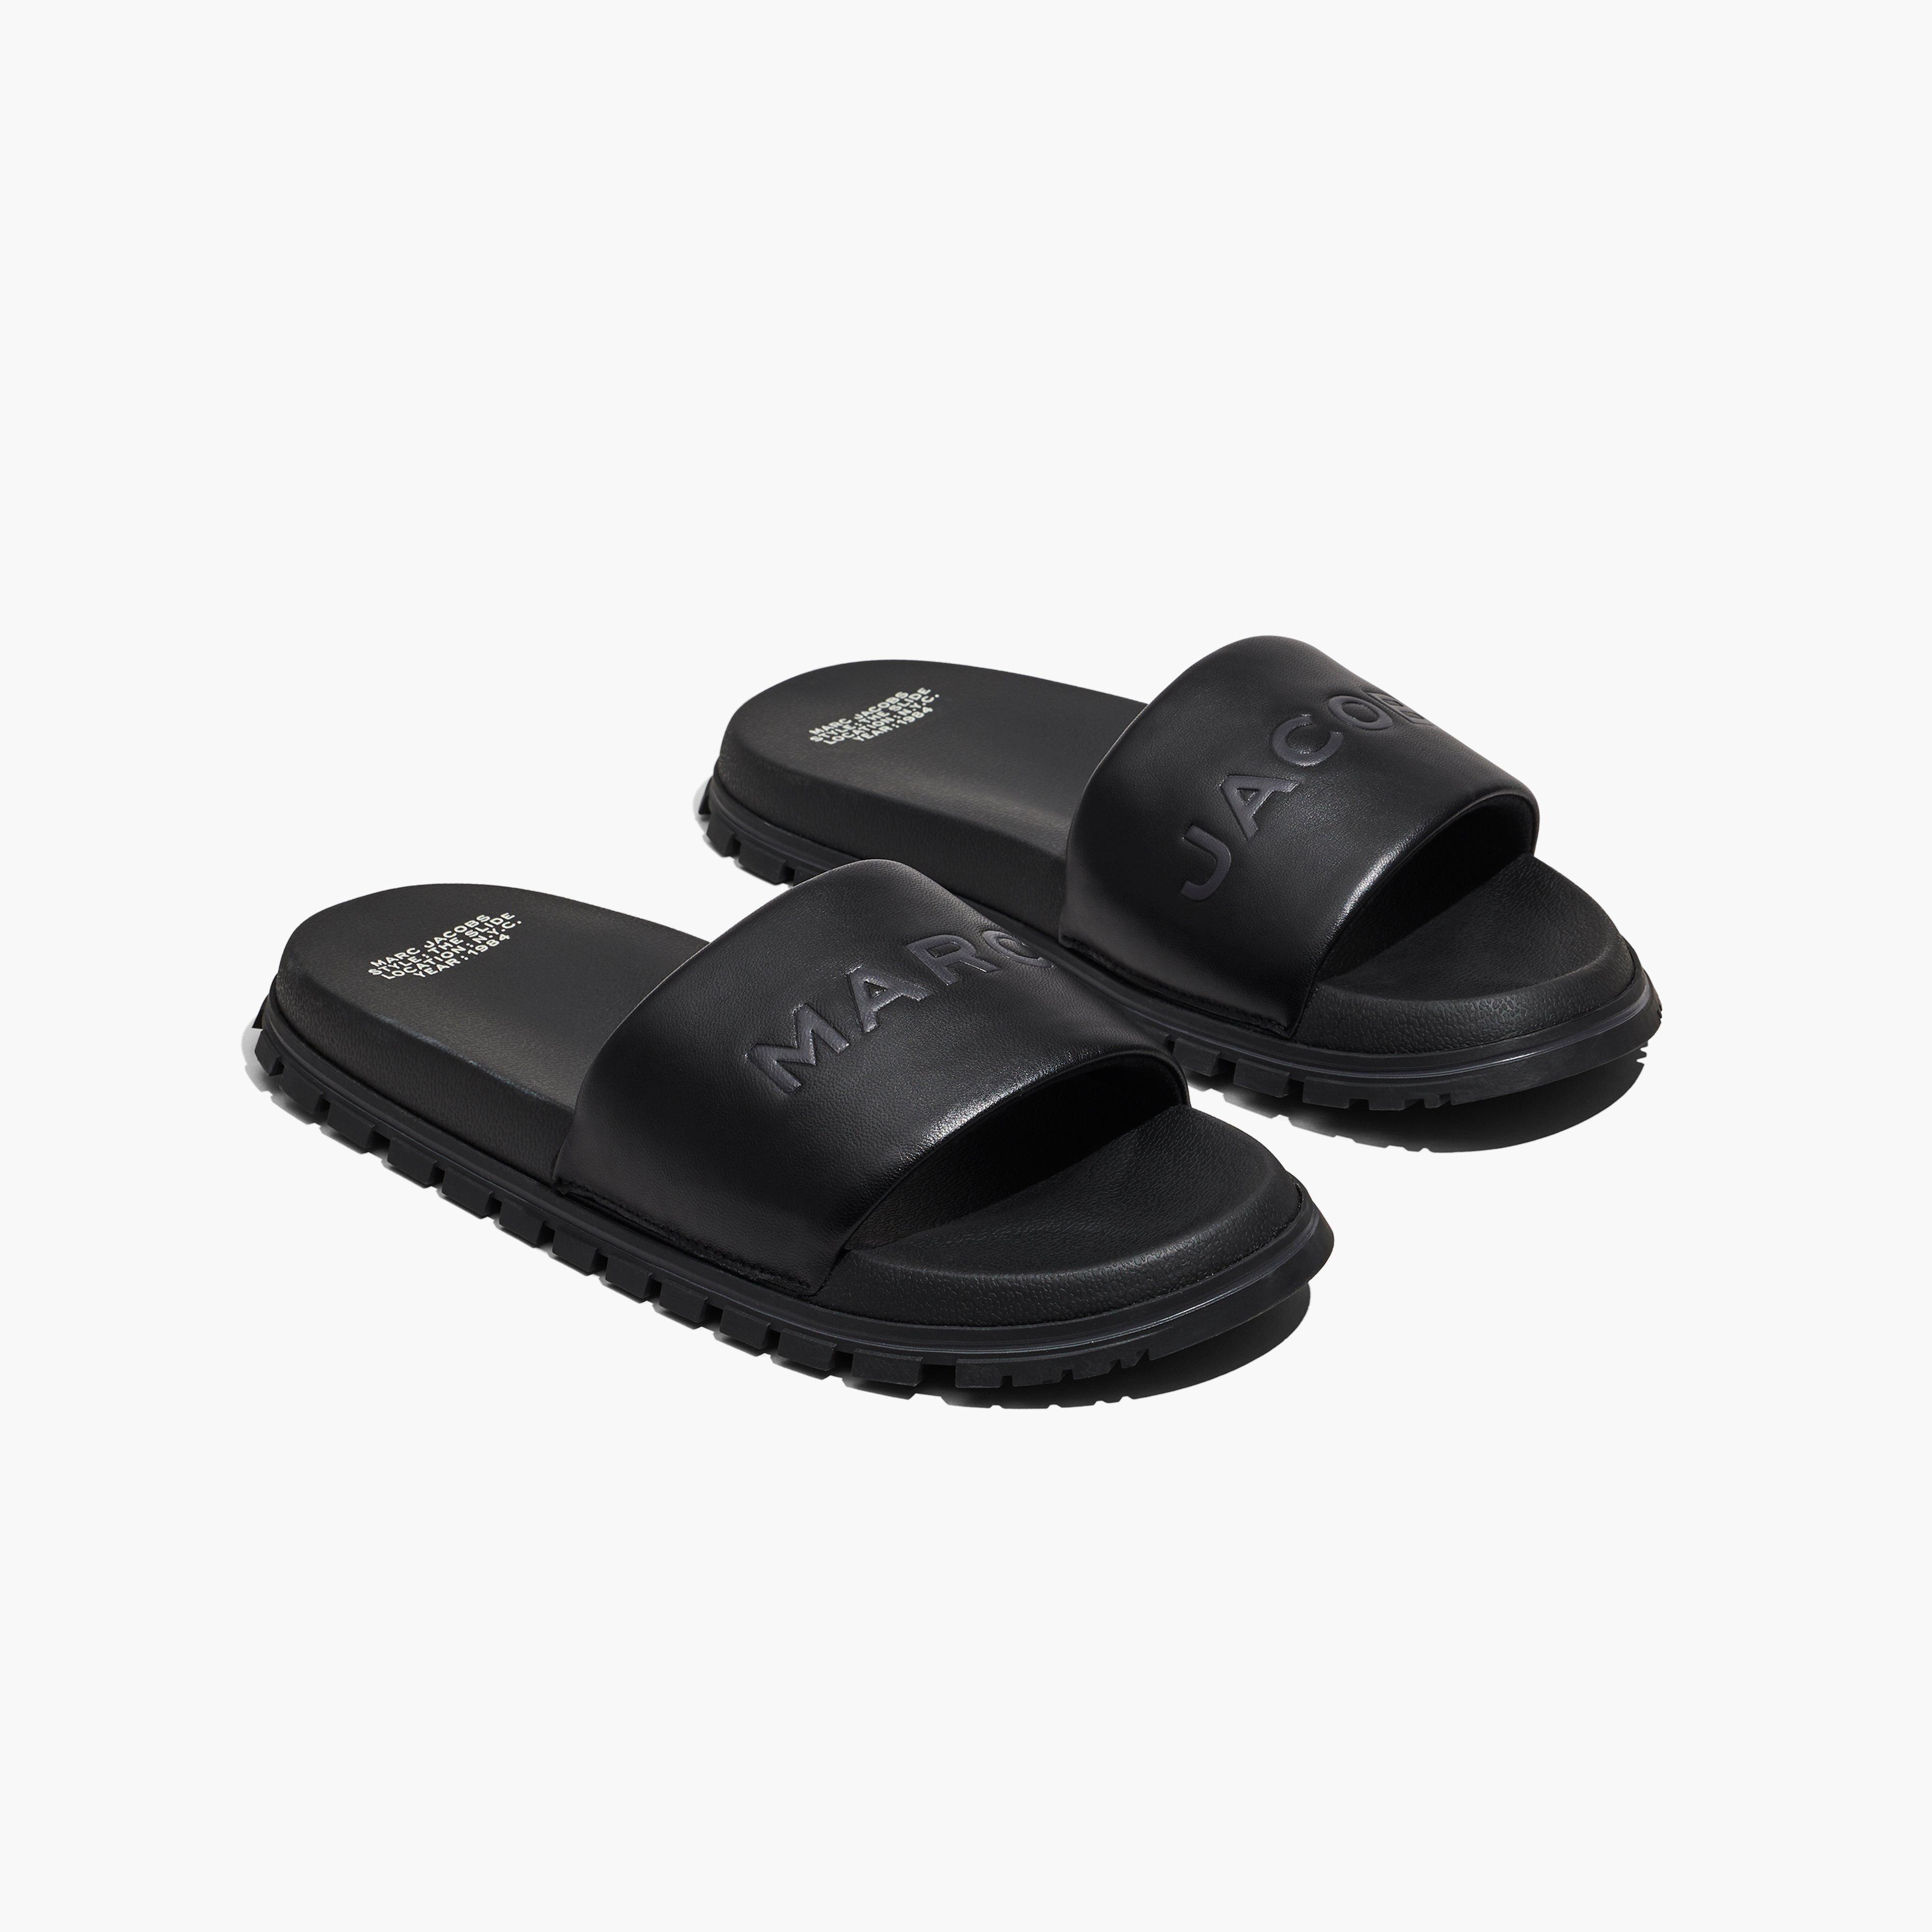 Marc by Marc jacobs The Slide,BLACK